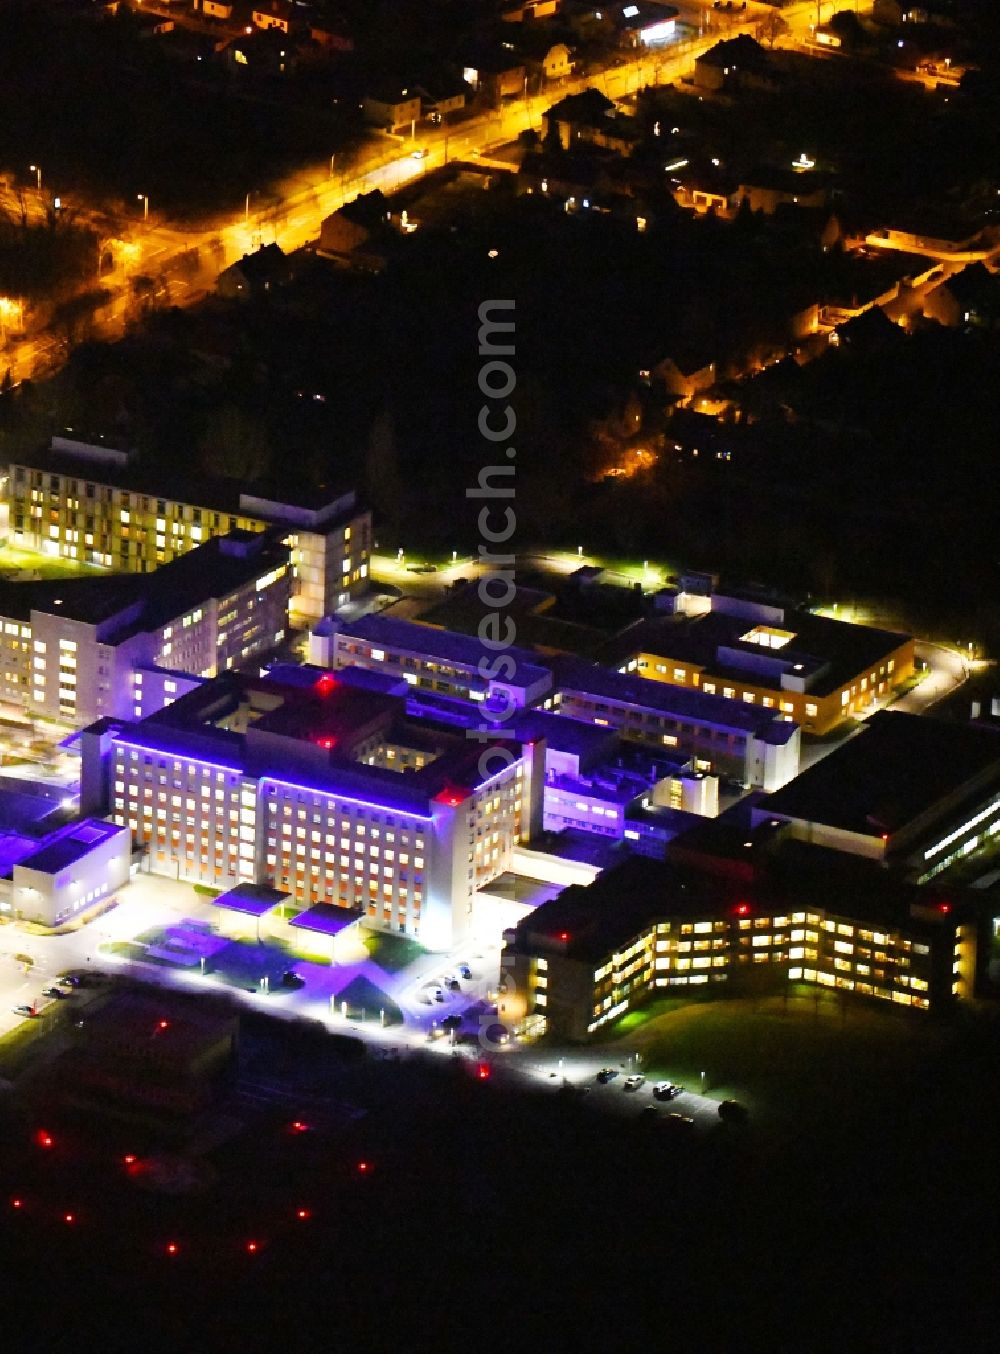 Magdeburg at night from the bird perspective: Night lighting Hospital grounds of the Clinic Klinikum Magdeburg an der Birkenallee in the district Neu Olvenstedt in Magdeburg in the state Saxony-Anhalt